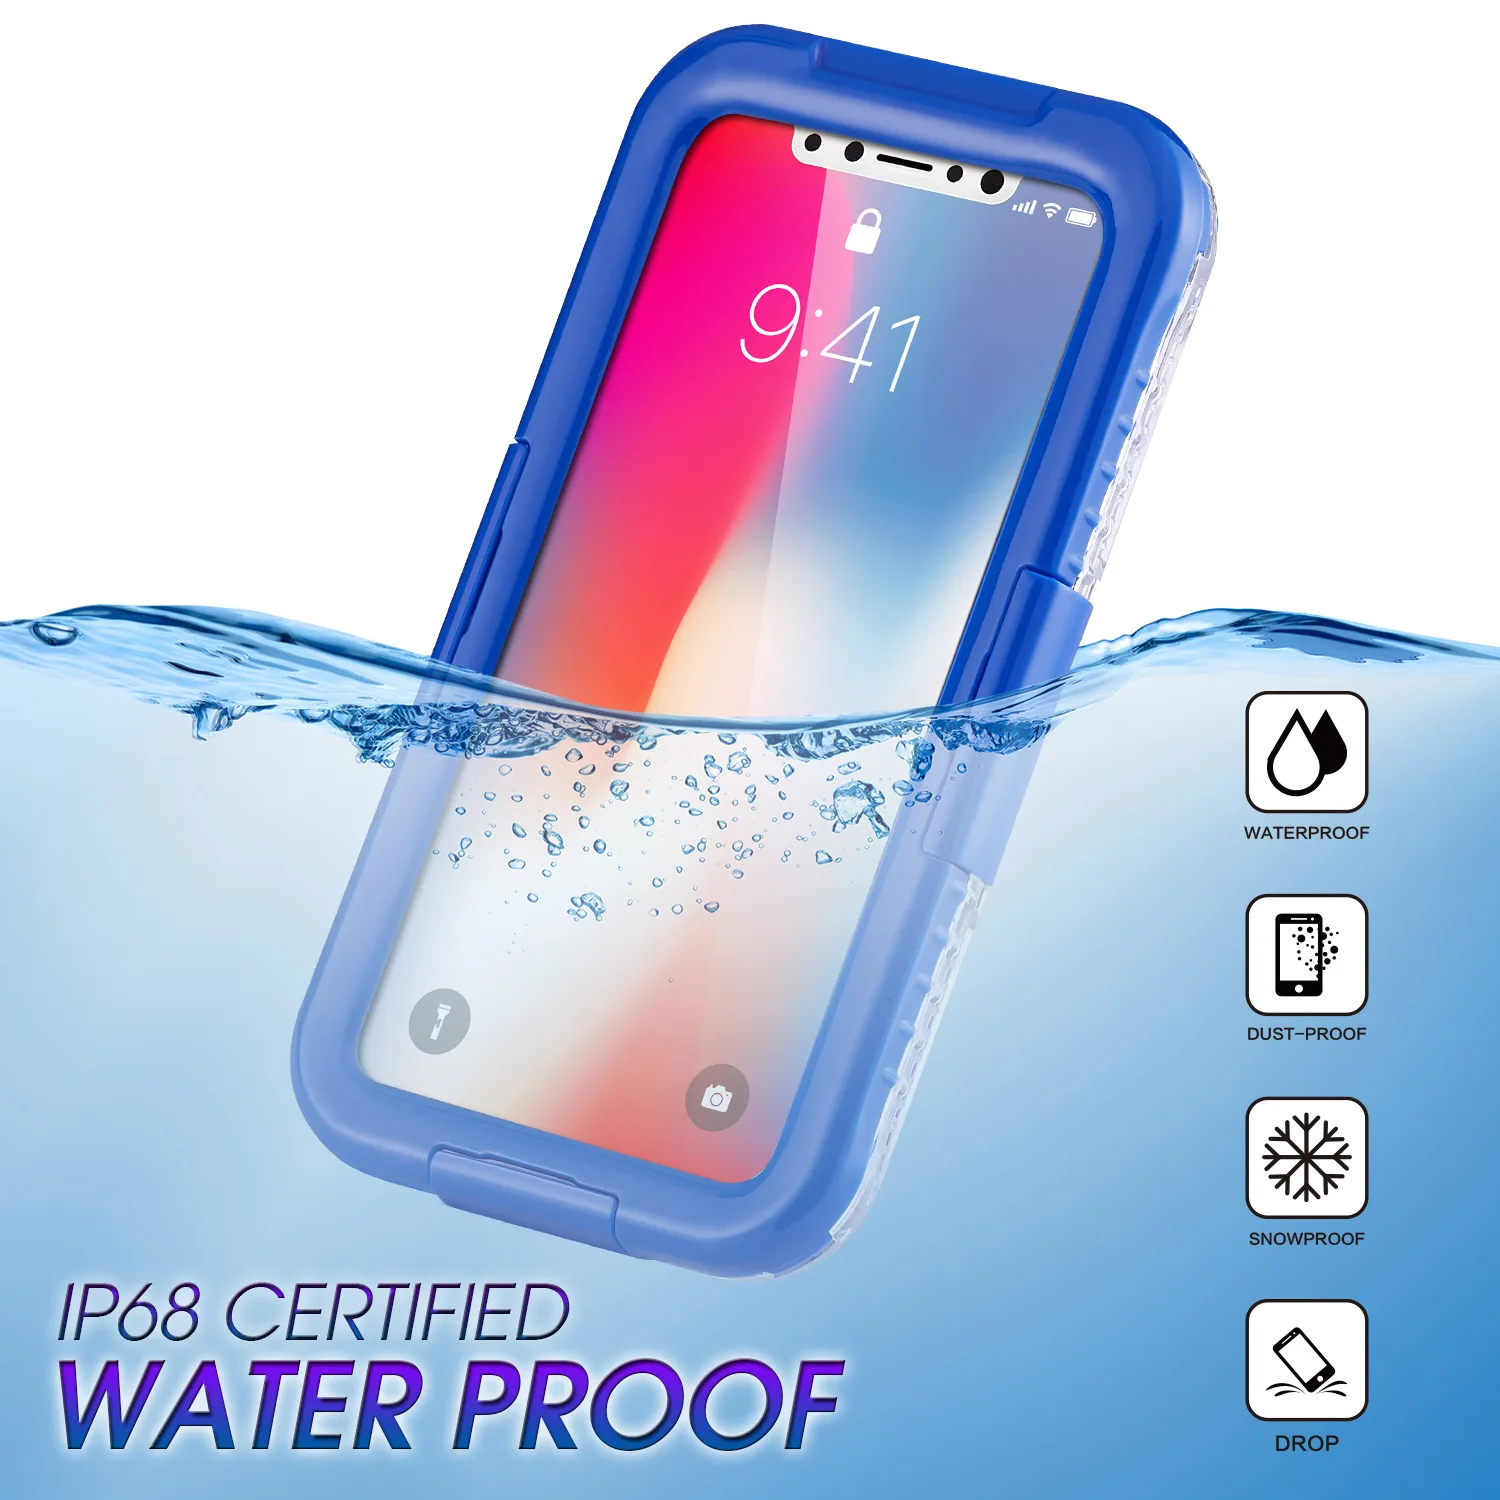 

Pixel 4A 5G 4XL 3AXL 4XL 2XL Waterproof Mobile Phone Case Underwater Diving Bag Snowproof Protective Cover For Google Pixel 3 2